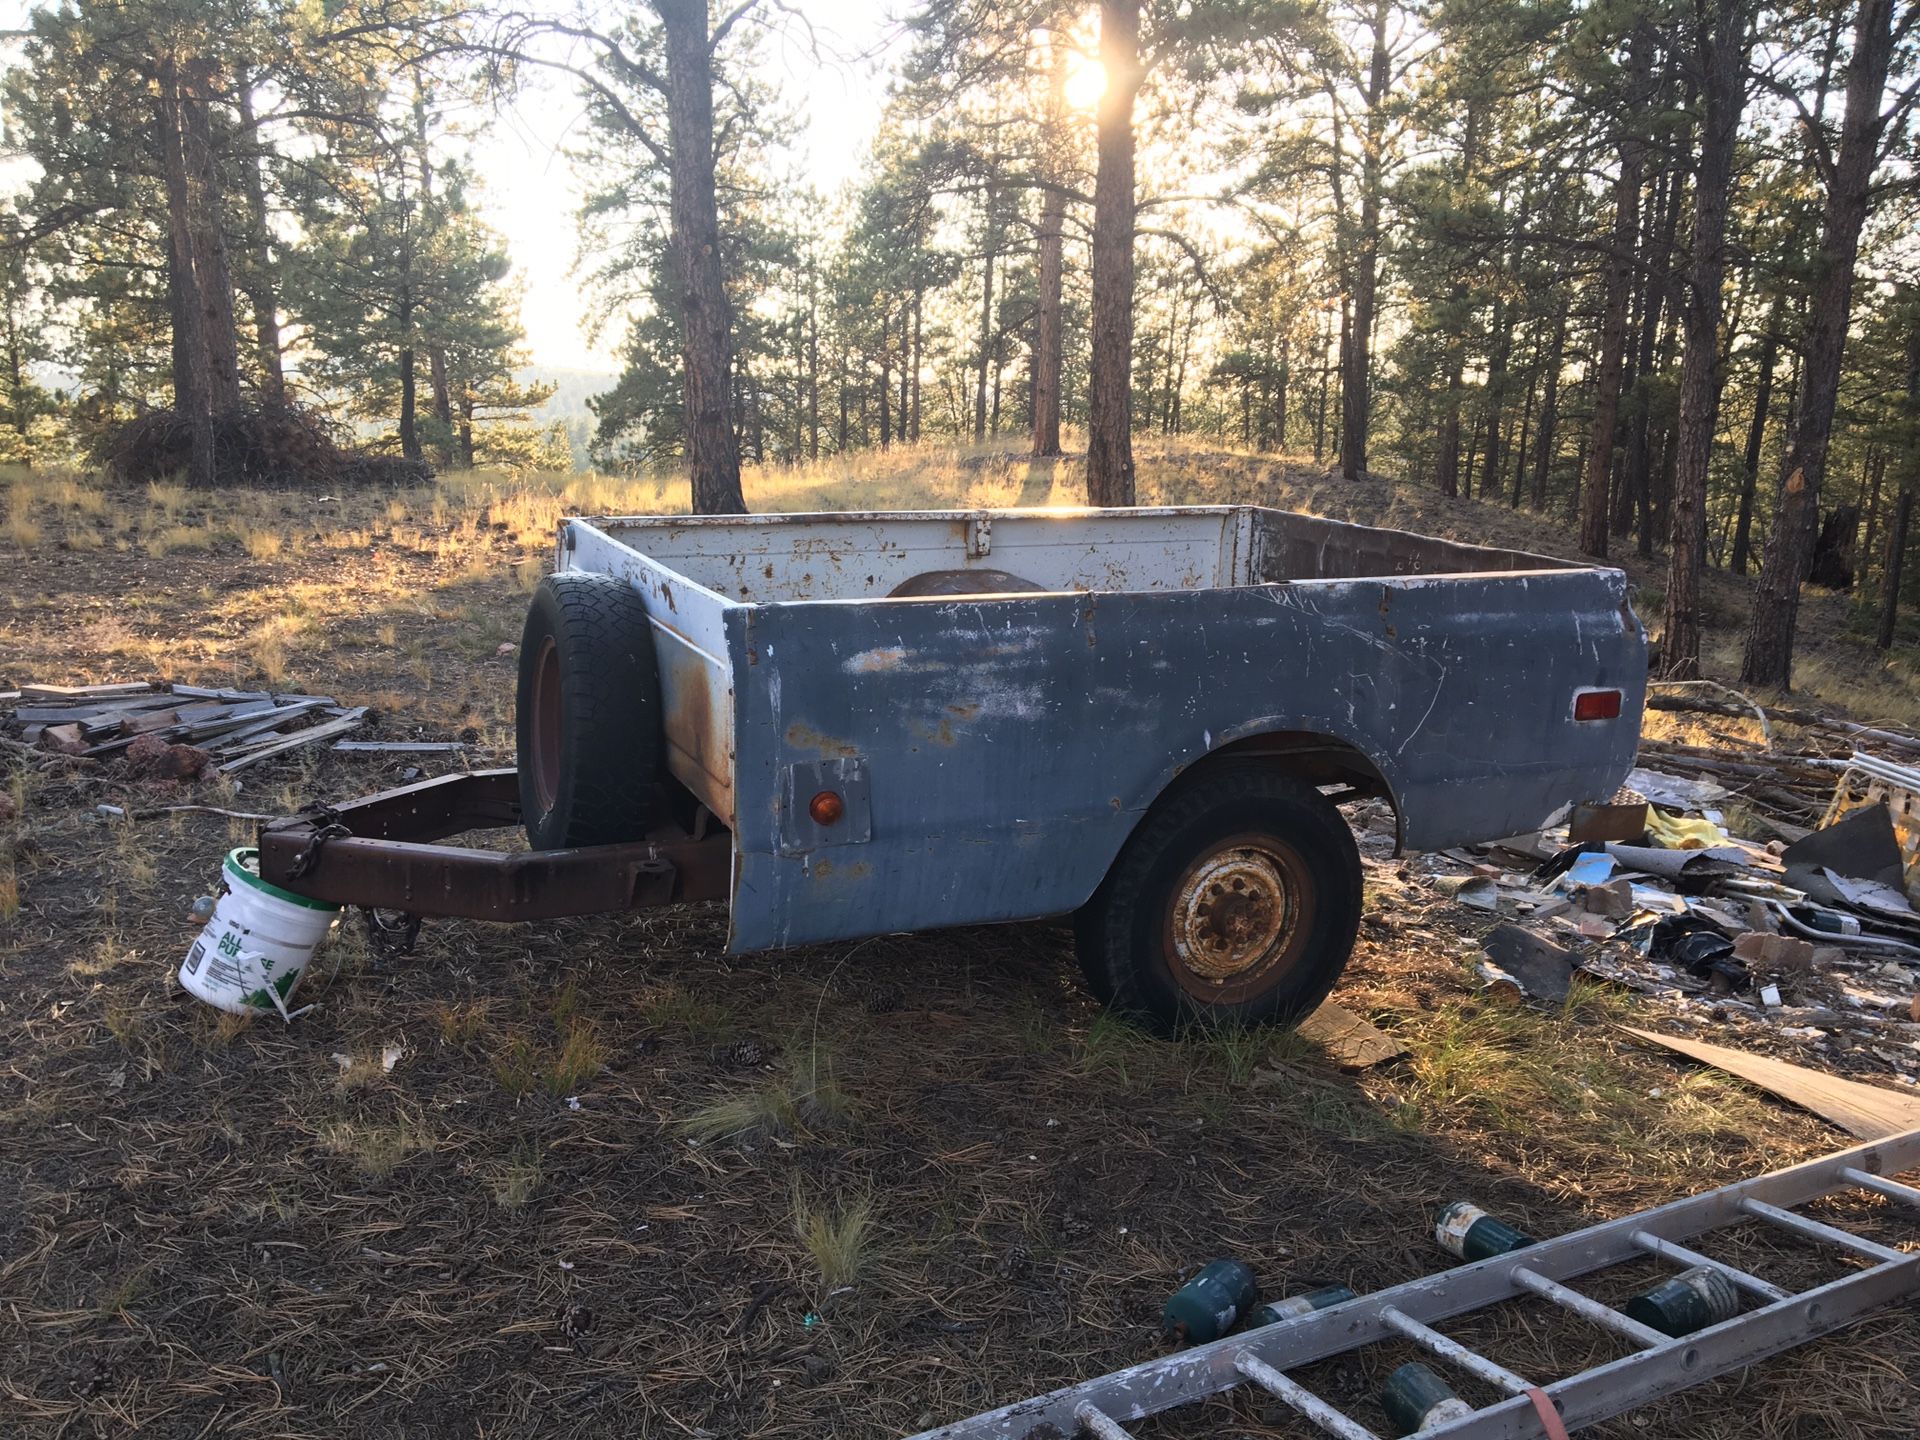 PRICE DROP!!! 1ton truck bed trailer$200.00 obo It has a Title!